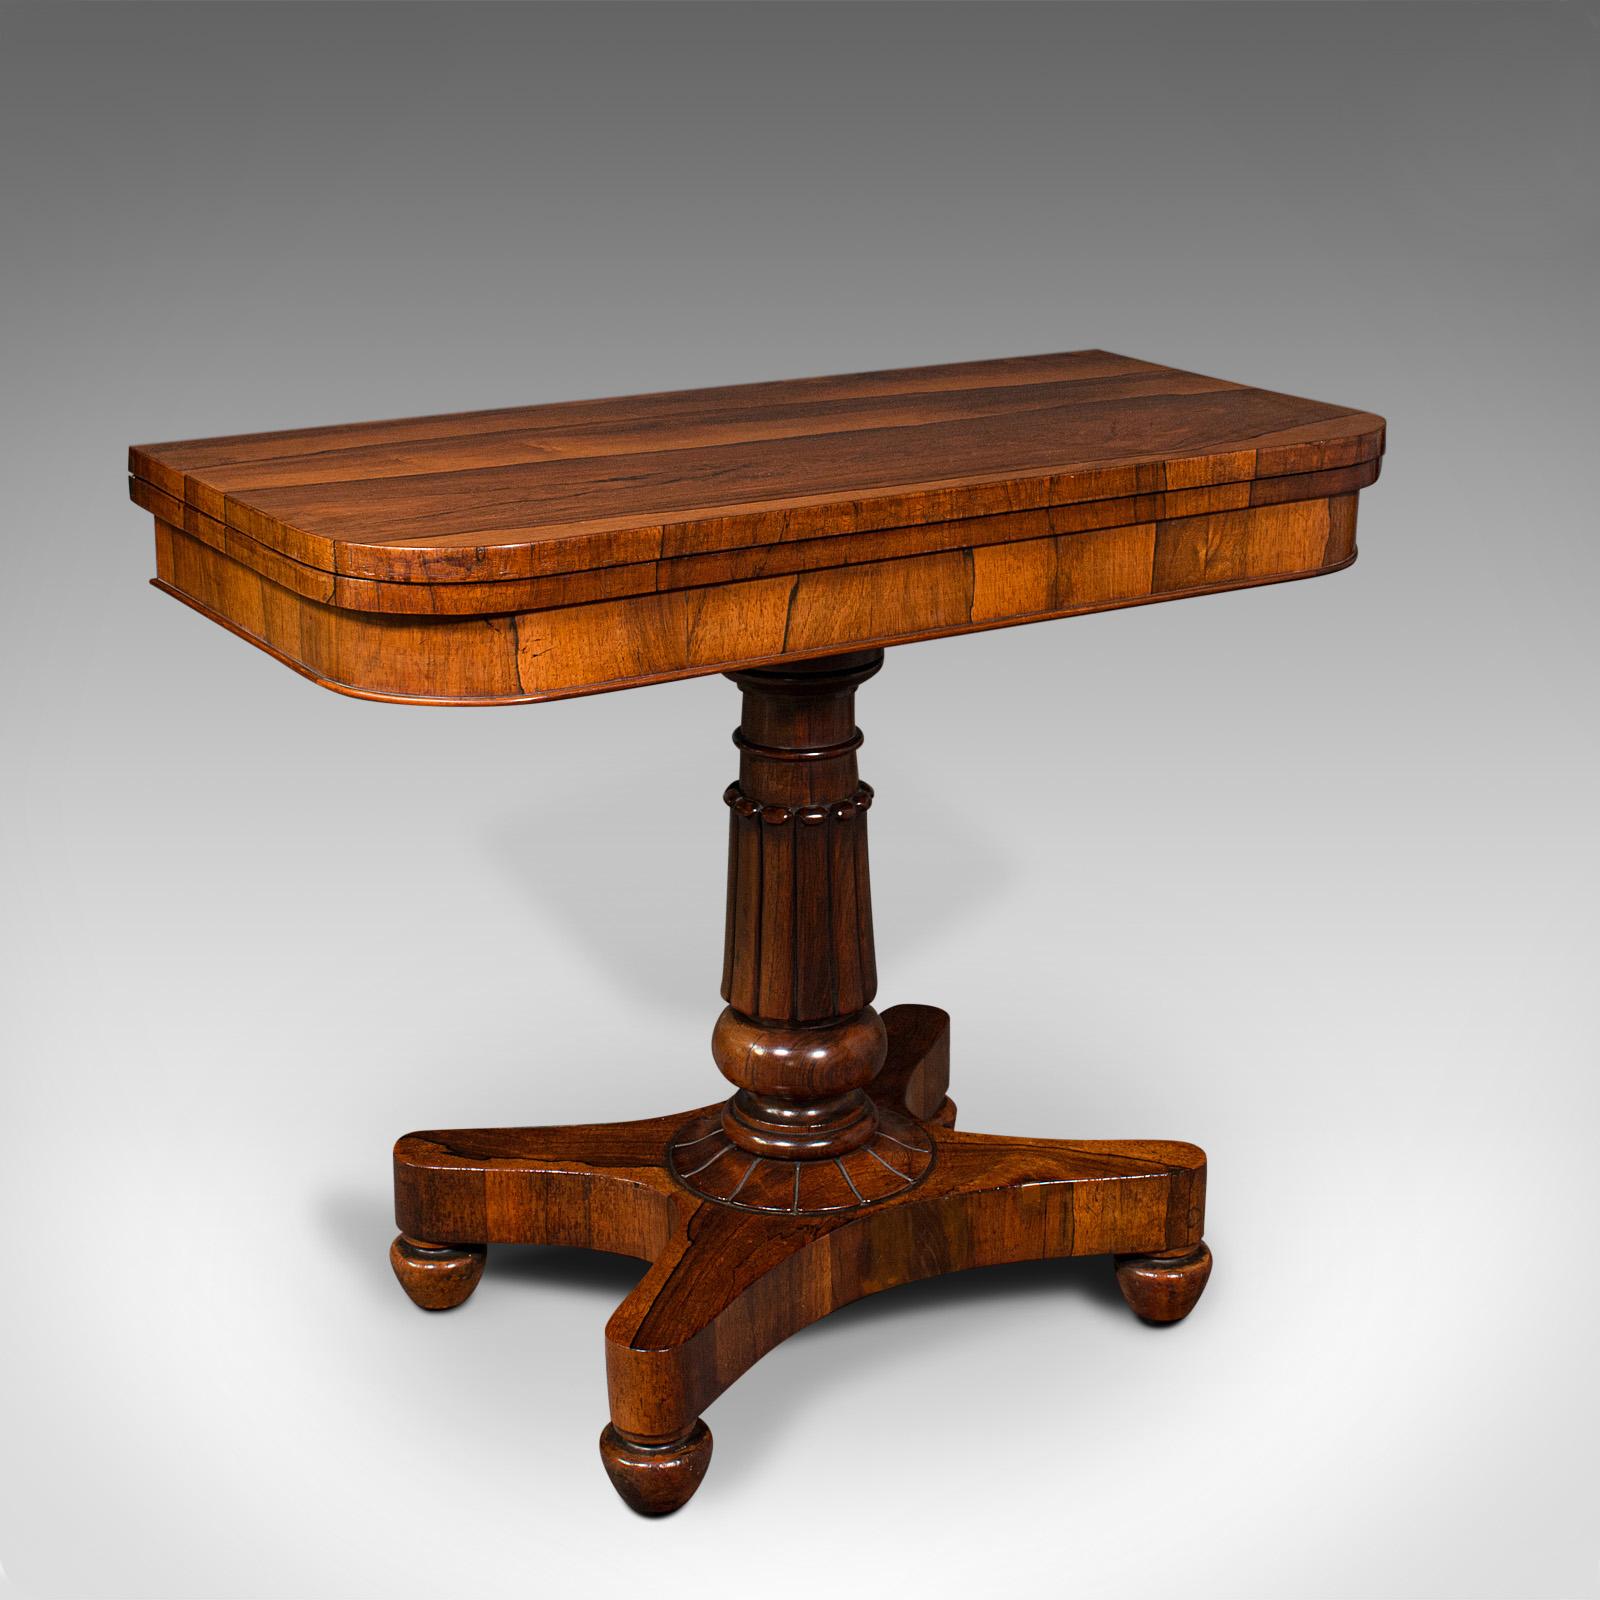 This is an exceptional antique fold-over card table. An English, rosewood games or console table, dating to the William IV period, circa 1835.

Magnificent craftsmanship distinguishes this fine gentleman's card table
Displays a desirable aged patina